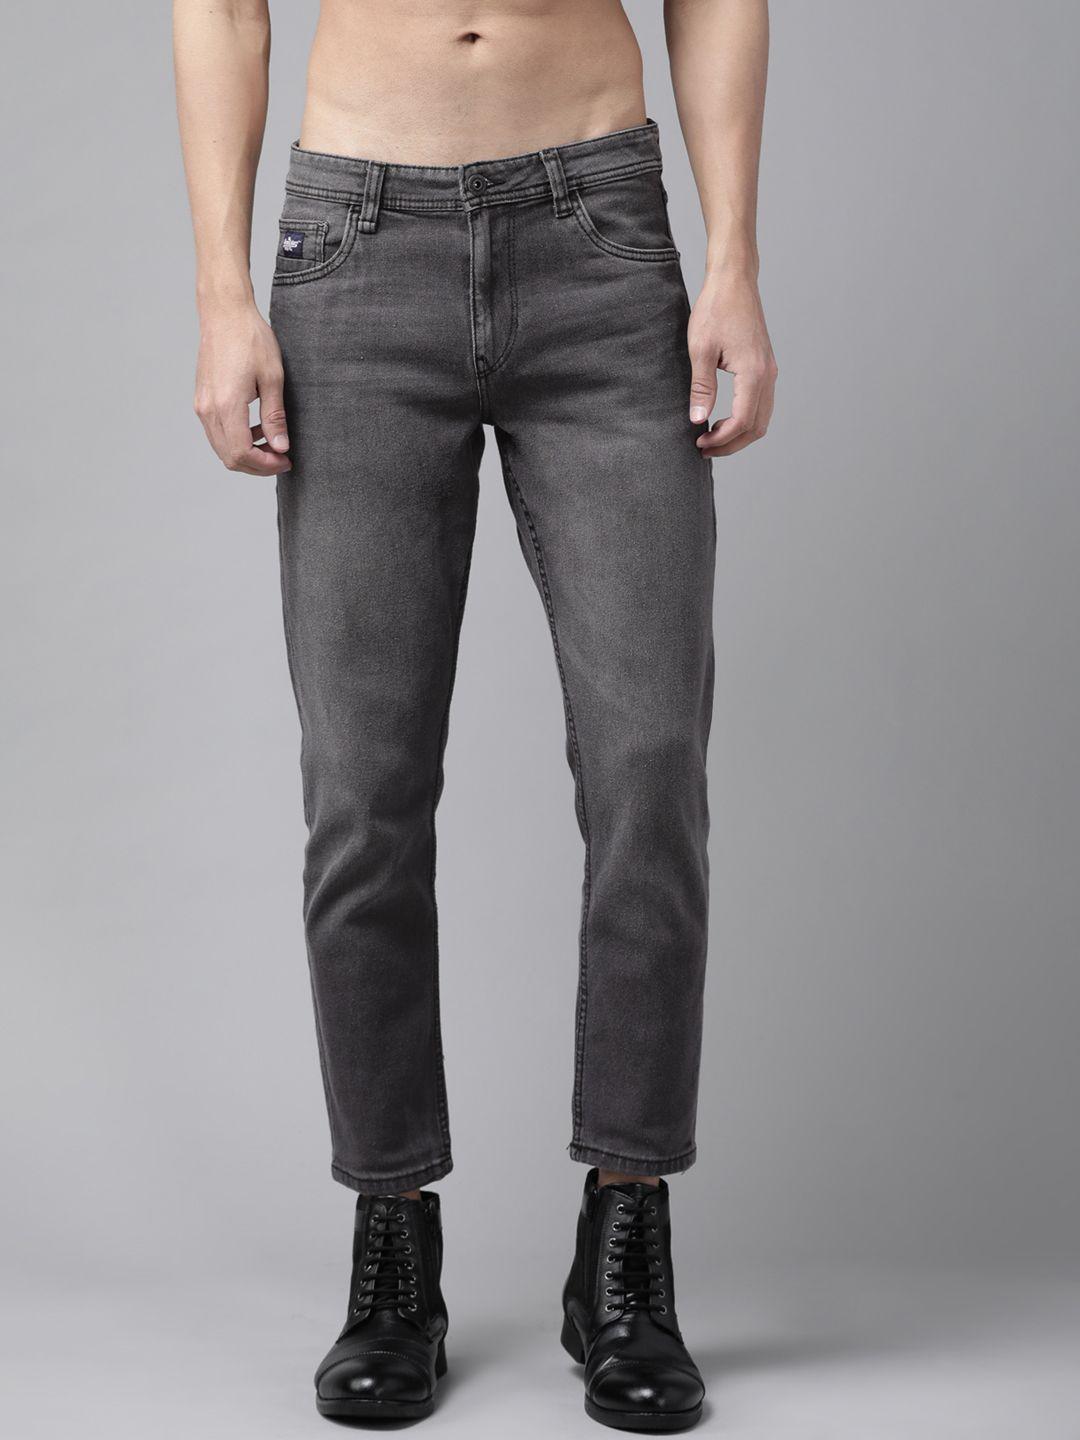 Roadster Men Charcoal Grey Carrot Fit Light Fade Stretchable Jeans